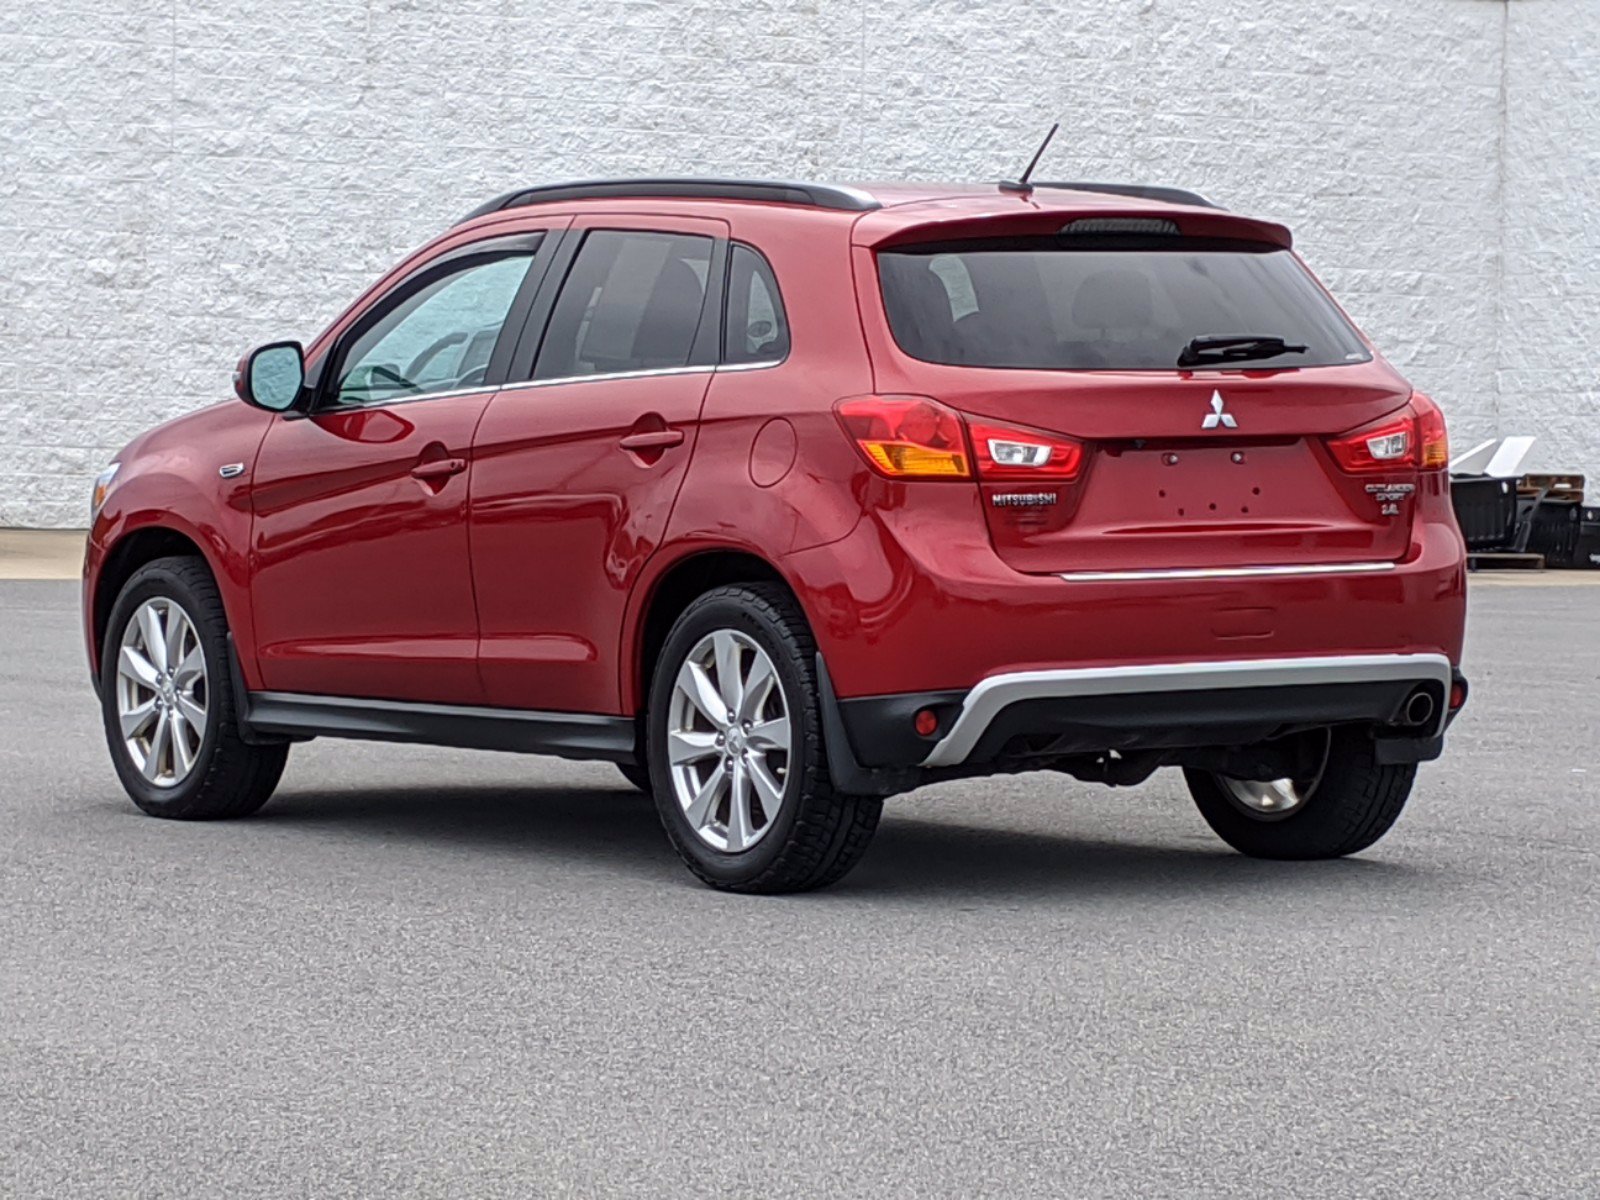 PreOwned 2015 Mitsubishi Outlander Sport 2.4 GT 4WD Sport